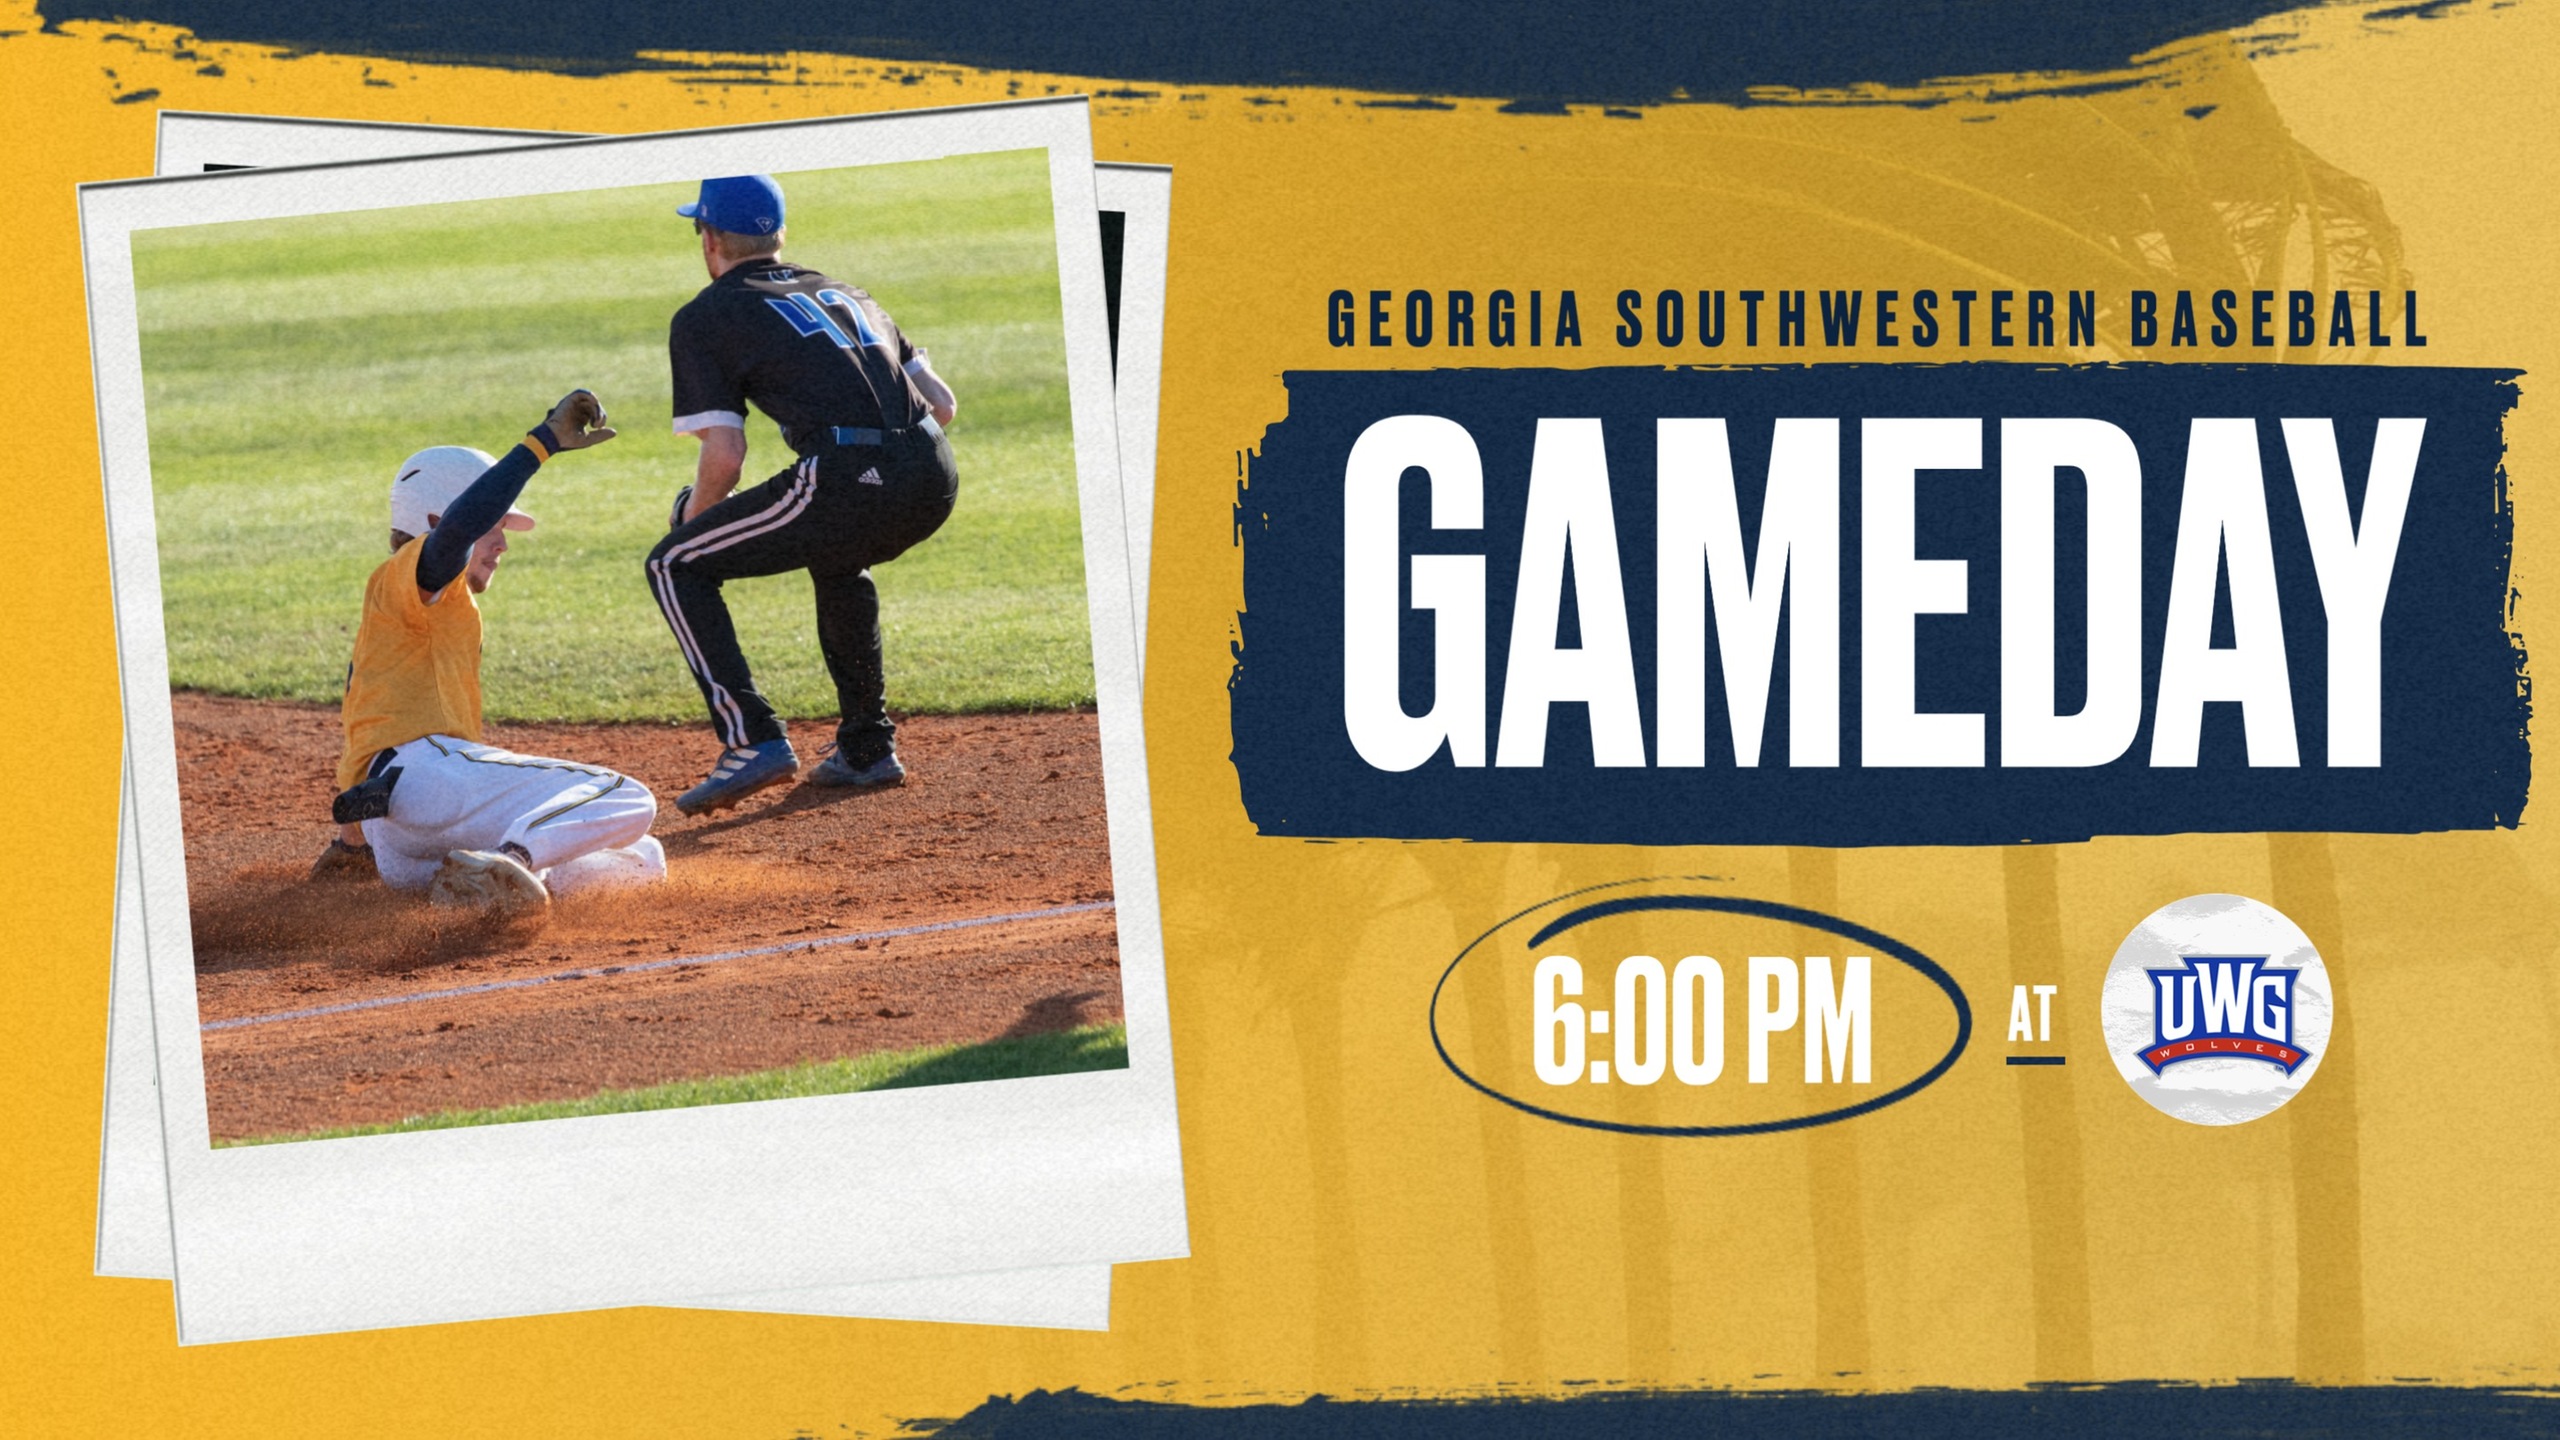 On the Road Tuesday: Baseball at West Georgia